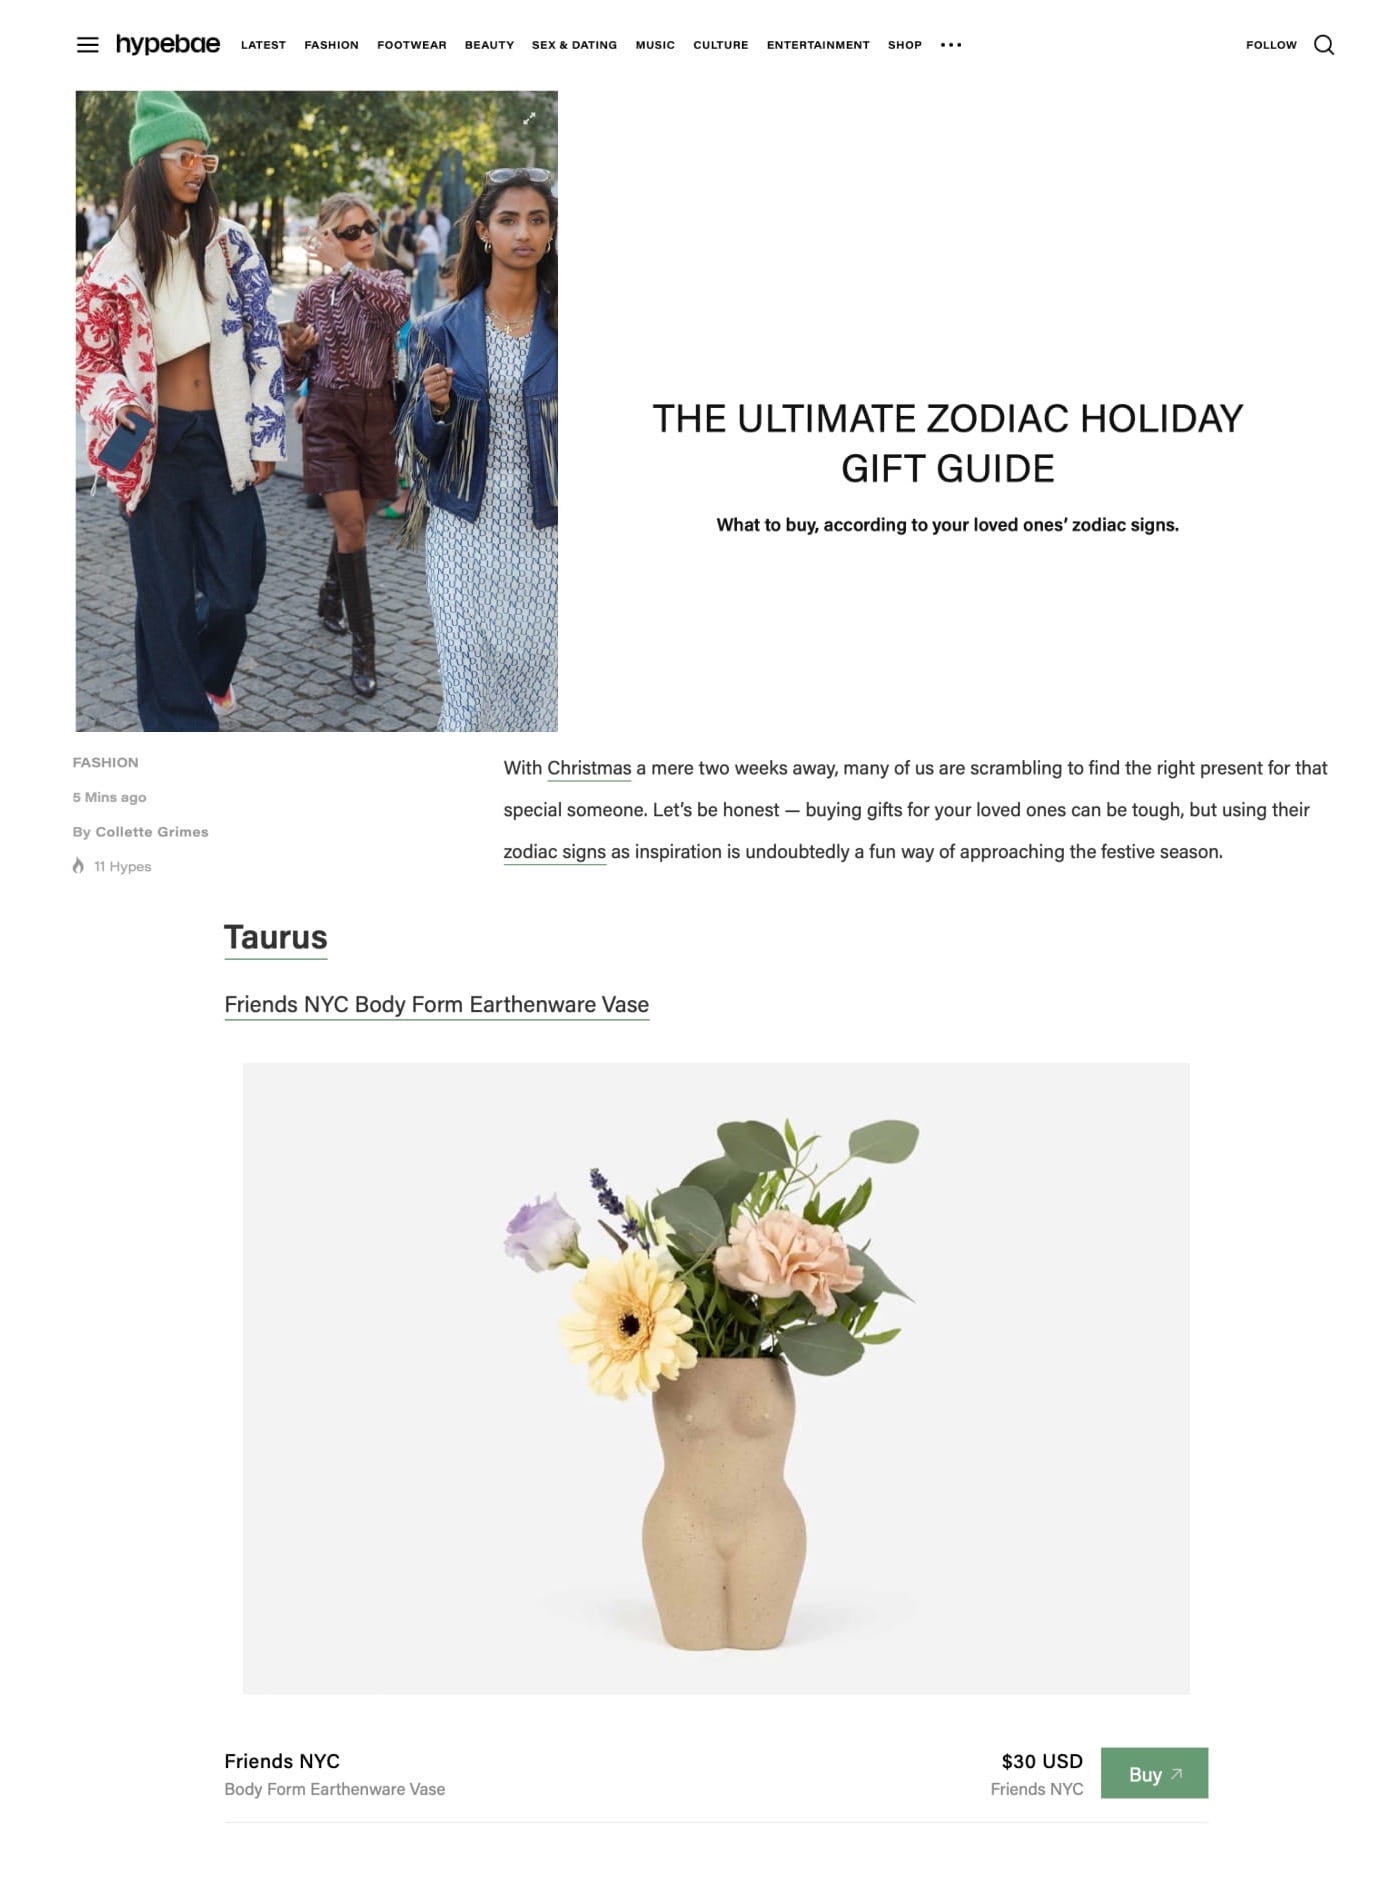 The Ultimate Zodiac Holiday Gift Guide